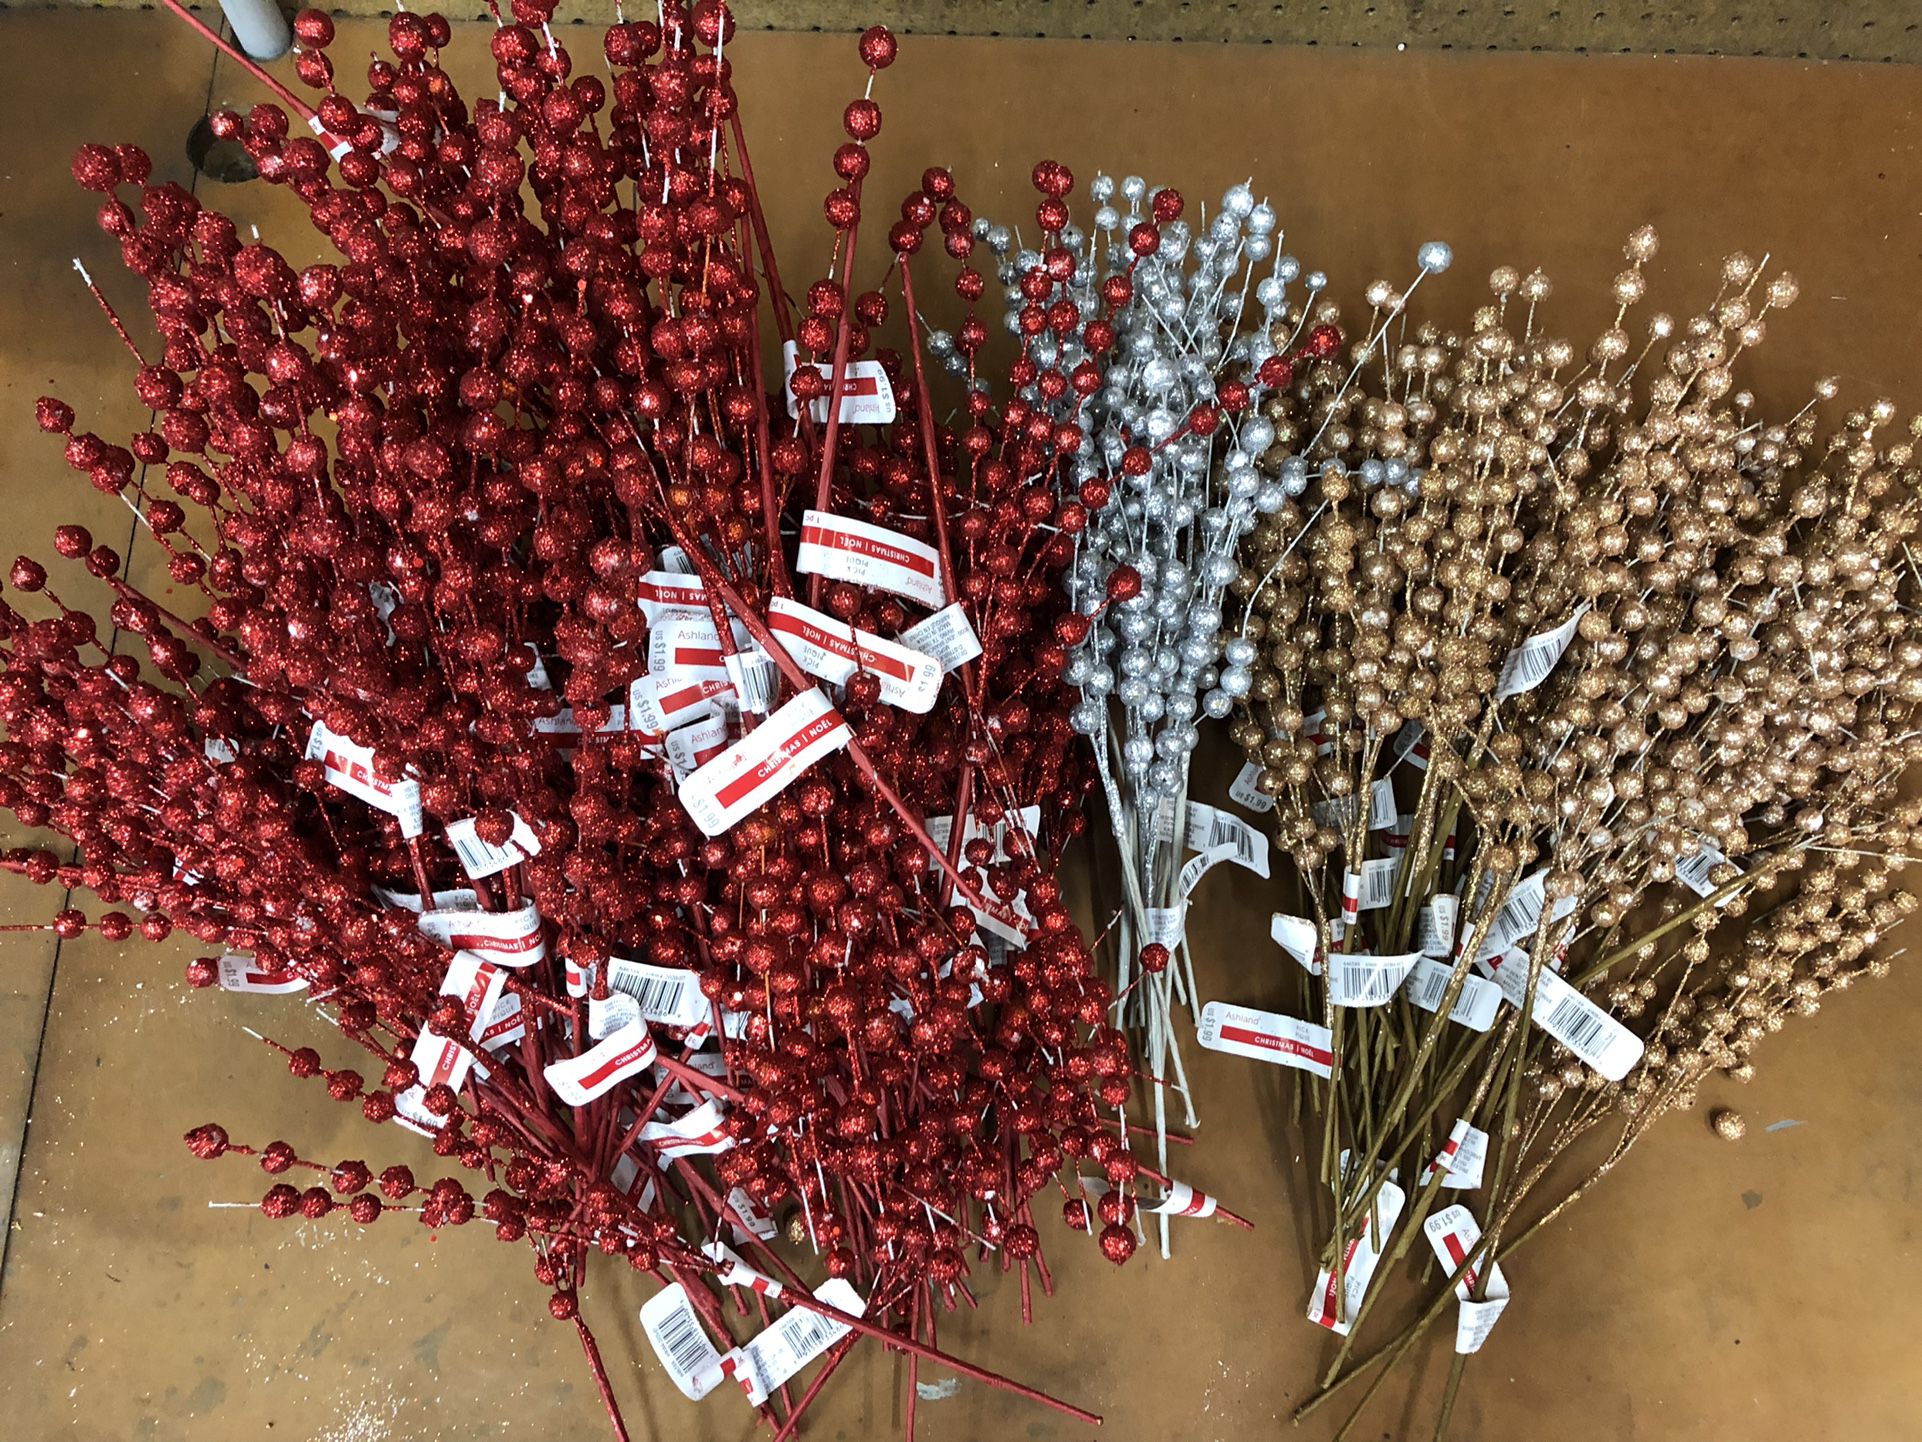 100 + Glitter ball Christmas Floral Picks NEW  -Some Have Damage